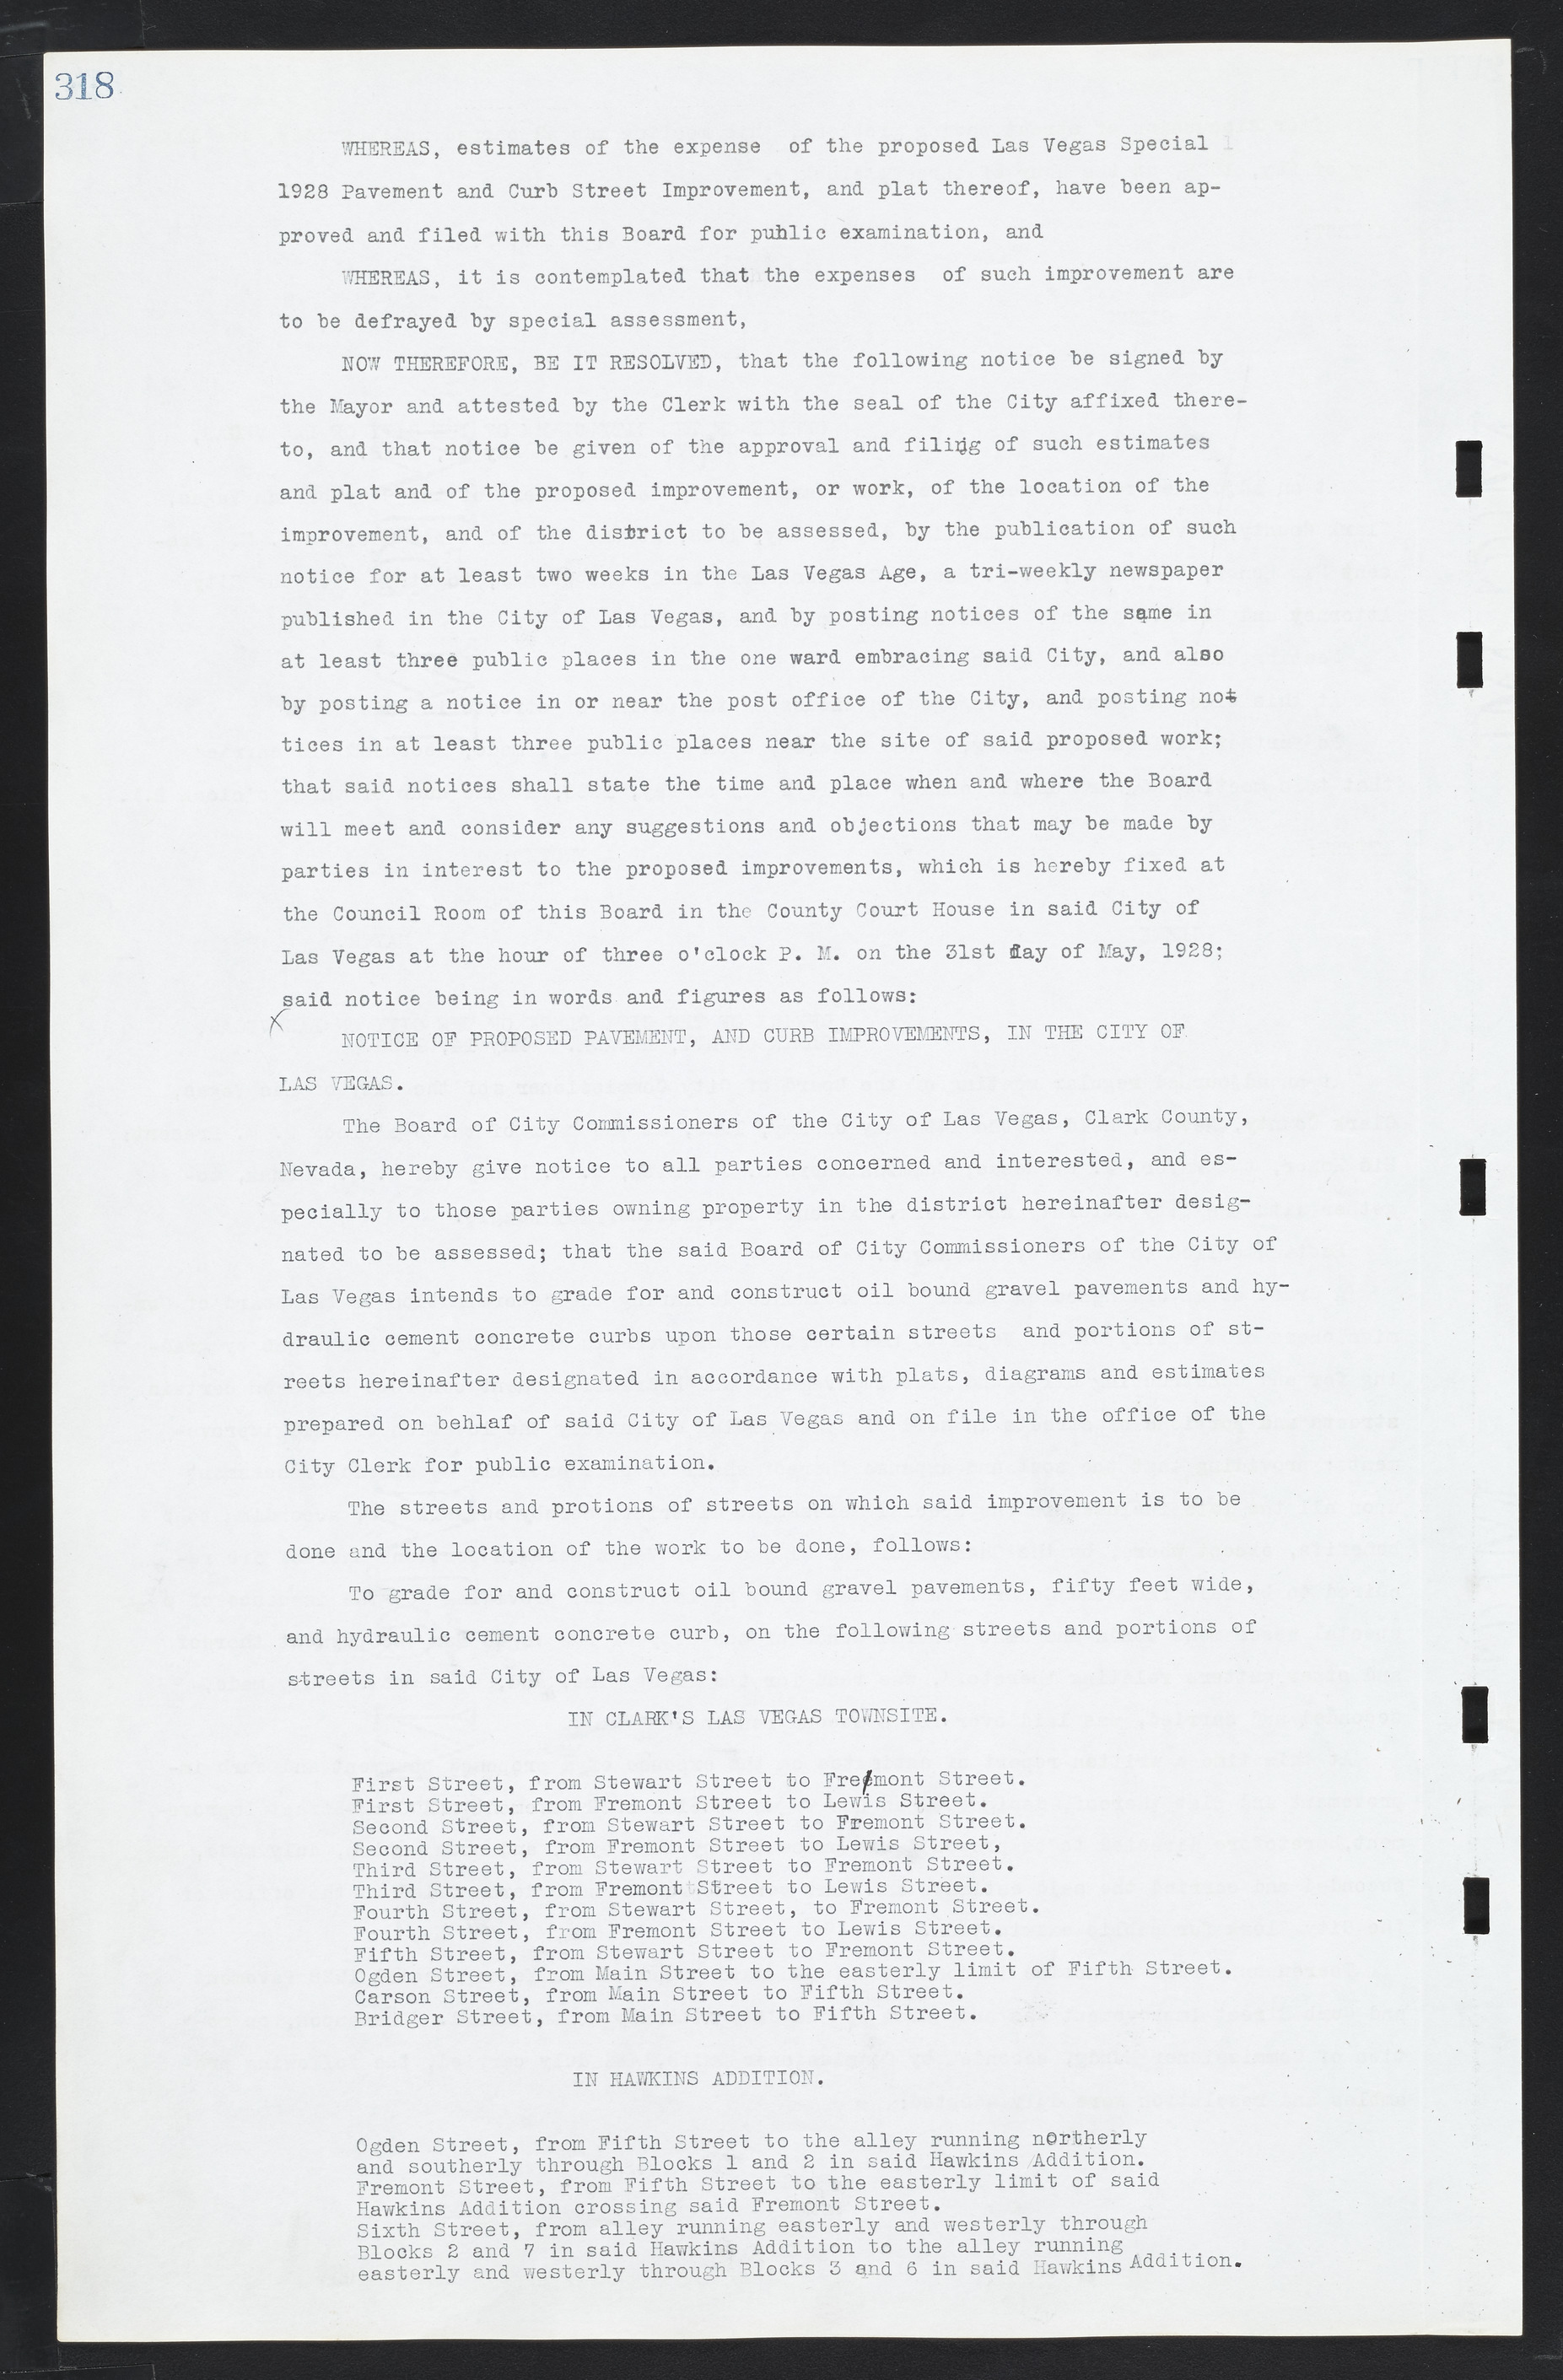 Las Vegas City Commission Minutes, March 1, 1922 to May 10, 1929, lvc000002-327